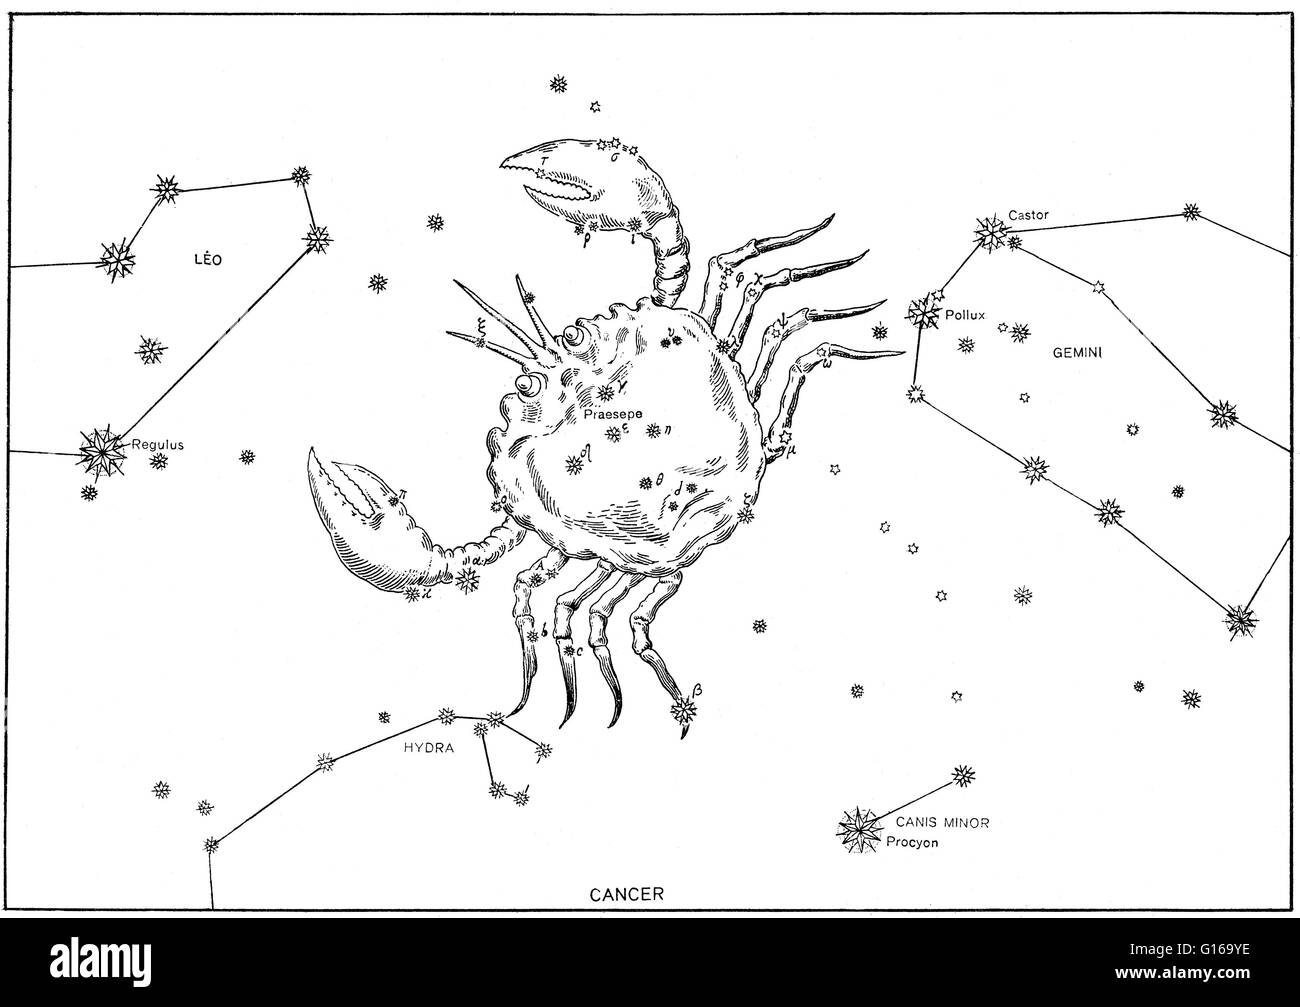 Cancer constellation from Johann Bayer's star atlas Uranometria Omnium Asterismorum, 1603. Cancer is one of the twelve constellations of the zodiac. It is one of the 48 constellations described by the 2nd century astronomer Ptolemy, and remains one of the Stock Photo